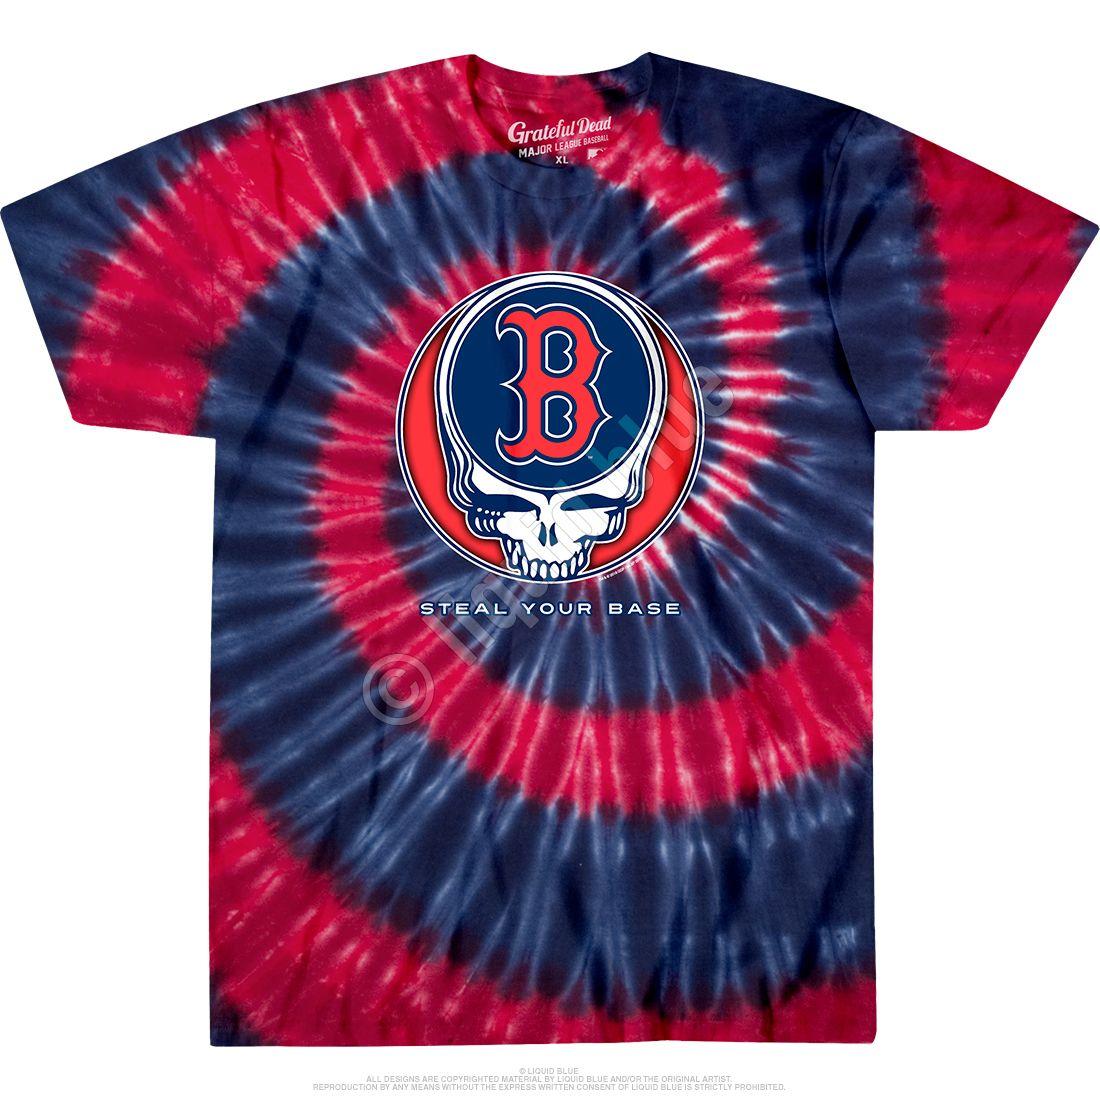 Liquid Blue and Red Logo - MLB Boston Red Sox GD Steal Your Base Tie Dye T Shirt Tee Liquid Blue